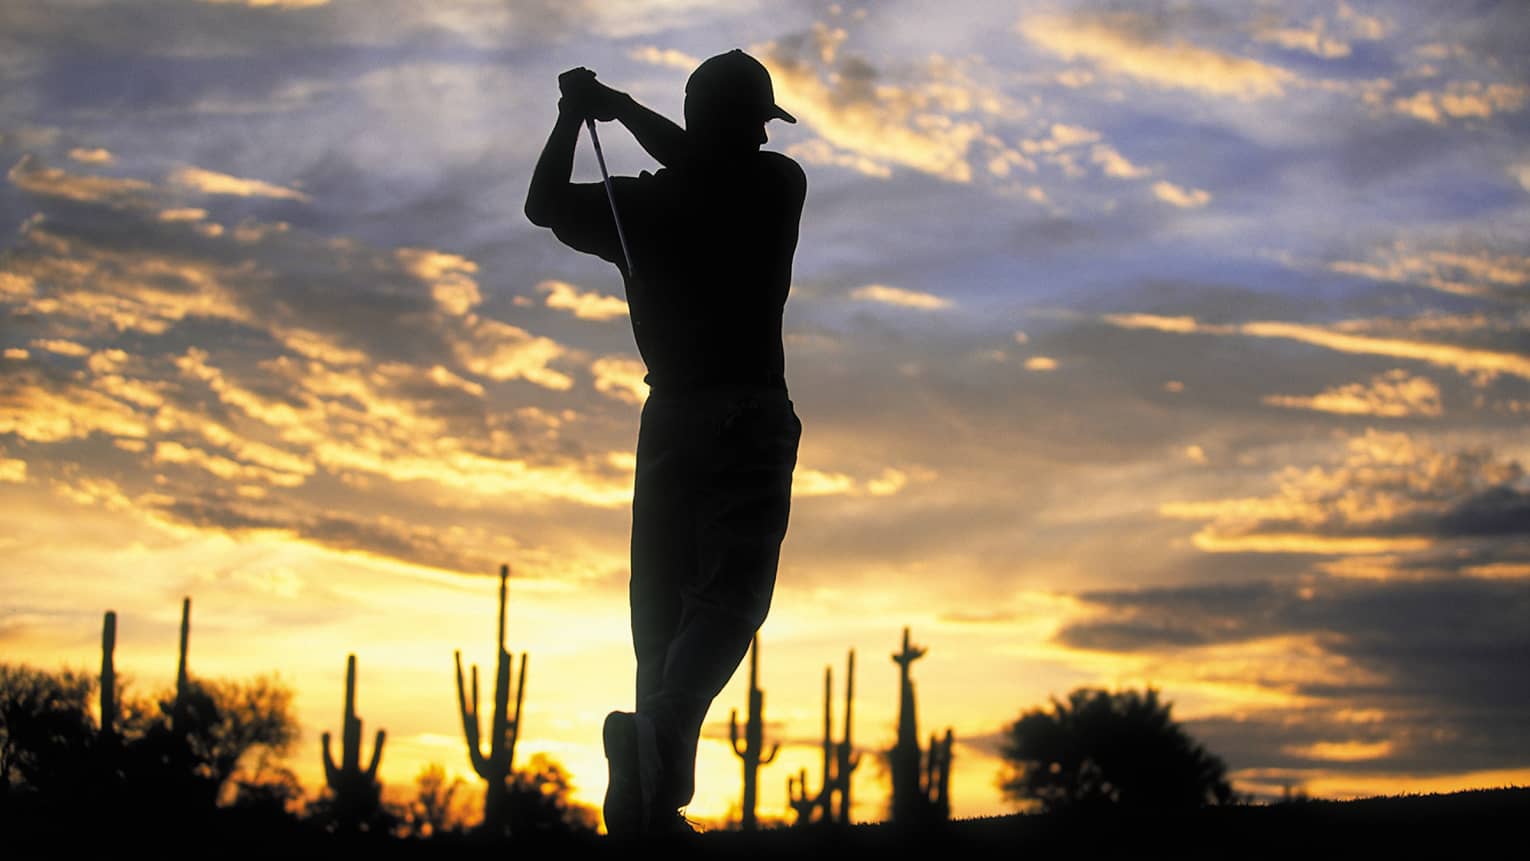 Silhouette of golfer swinging club against sunset sky at Troon North golf course